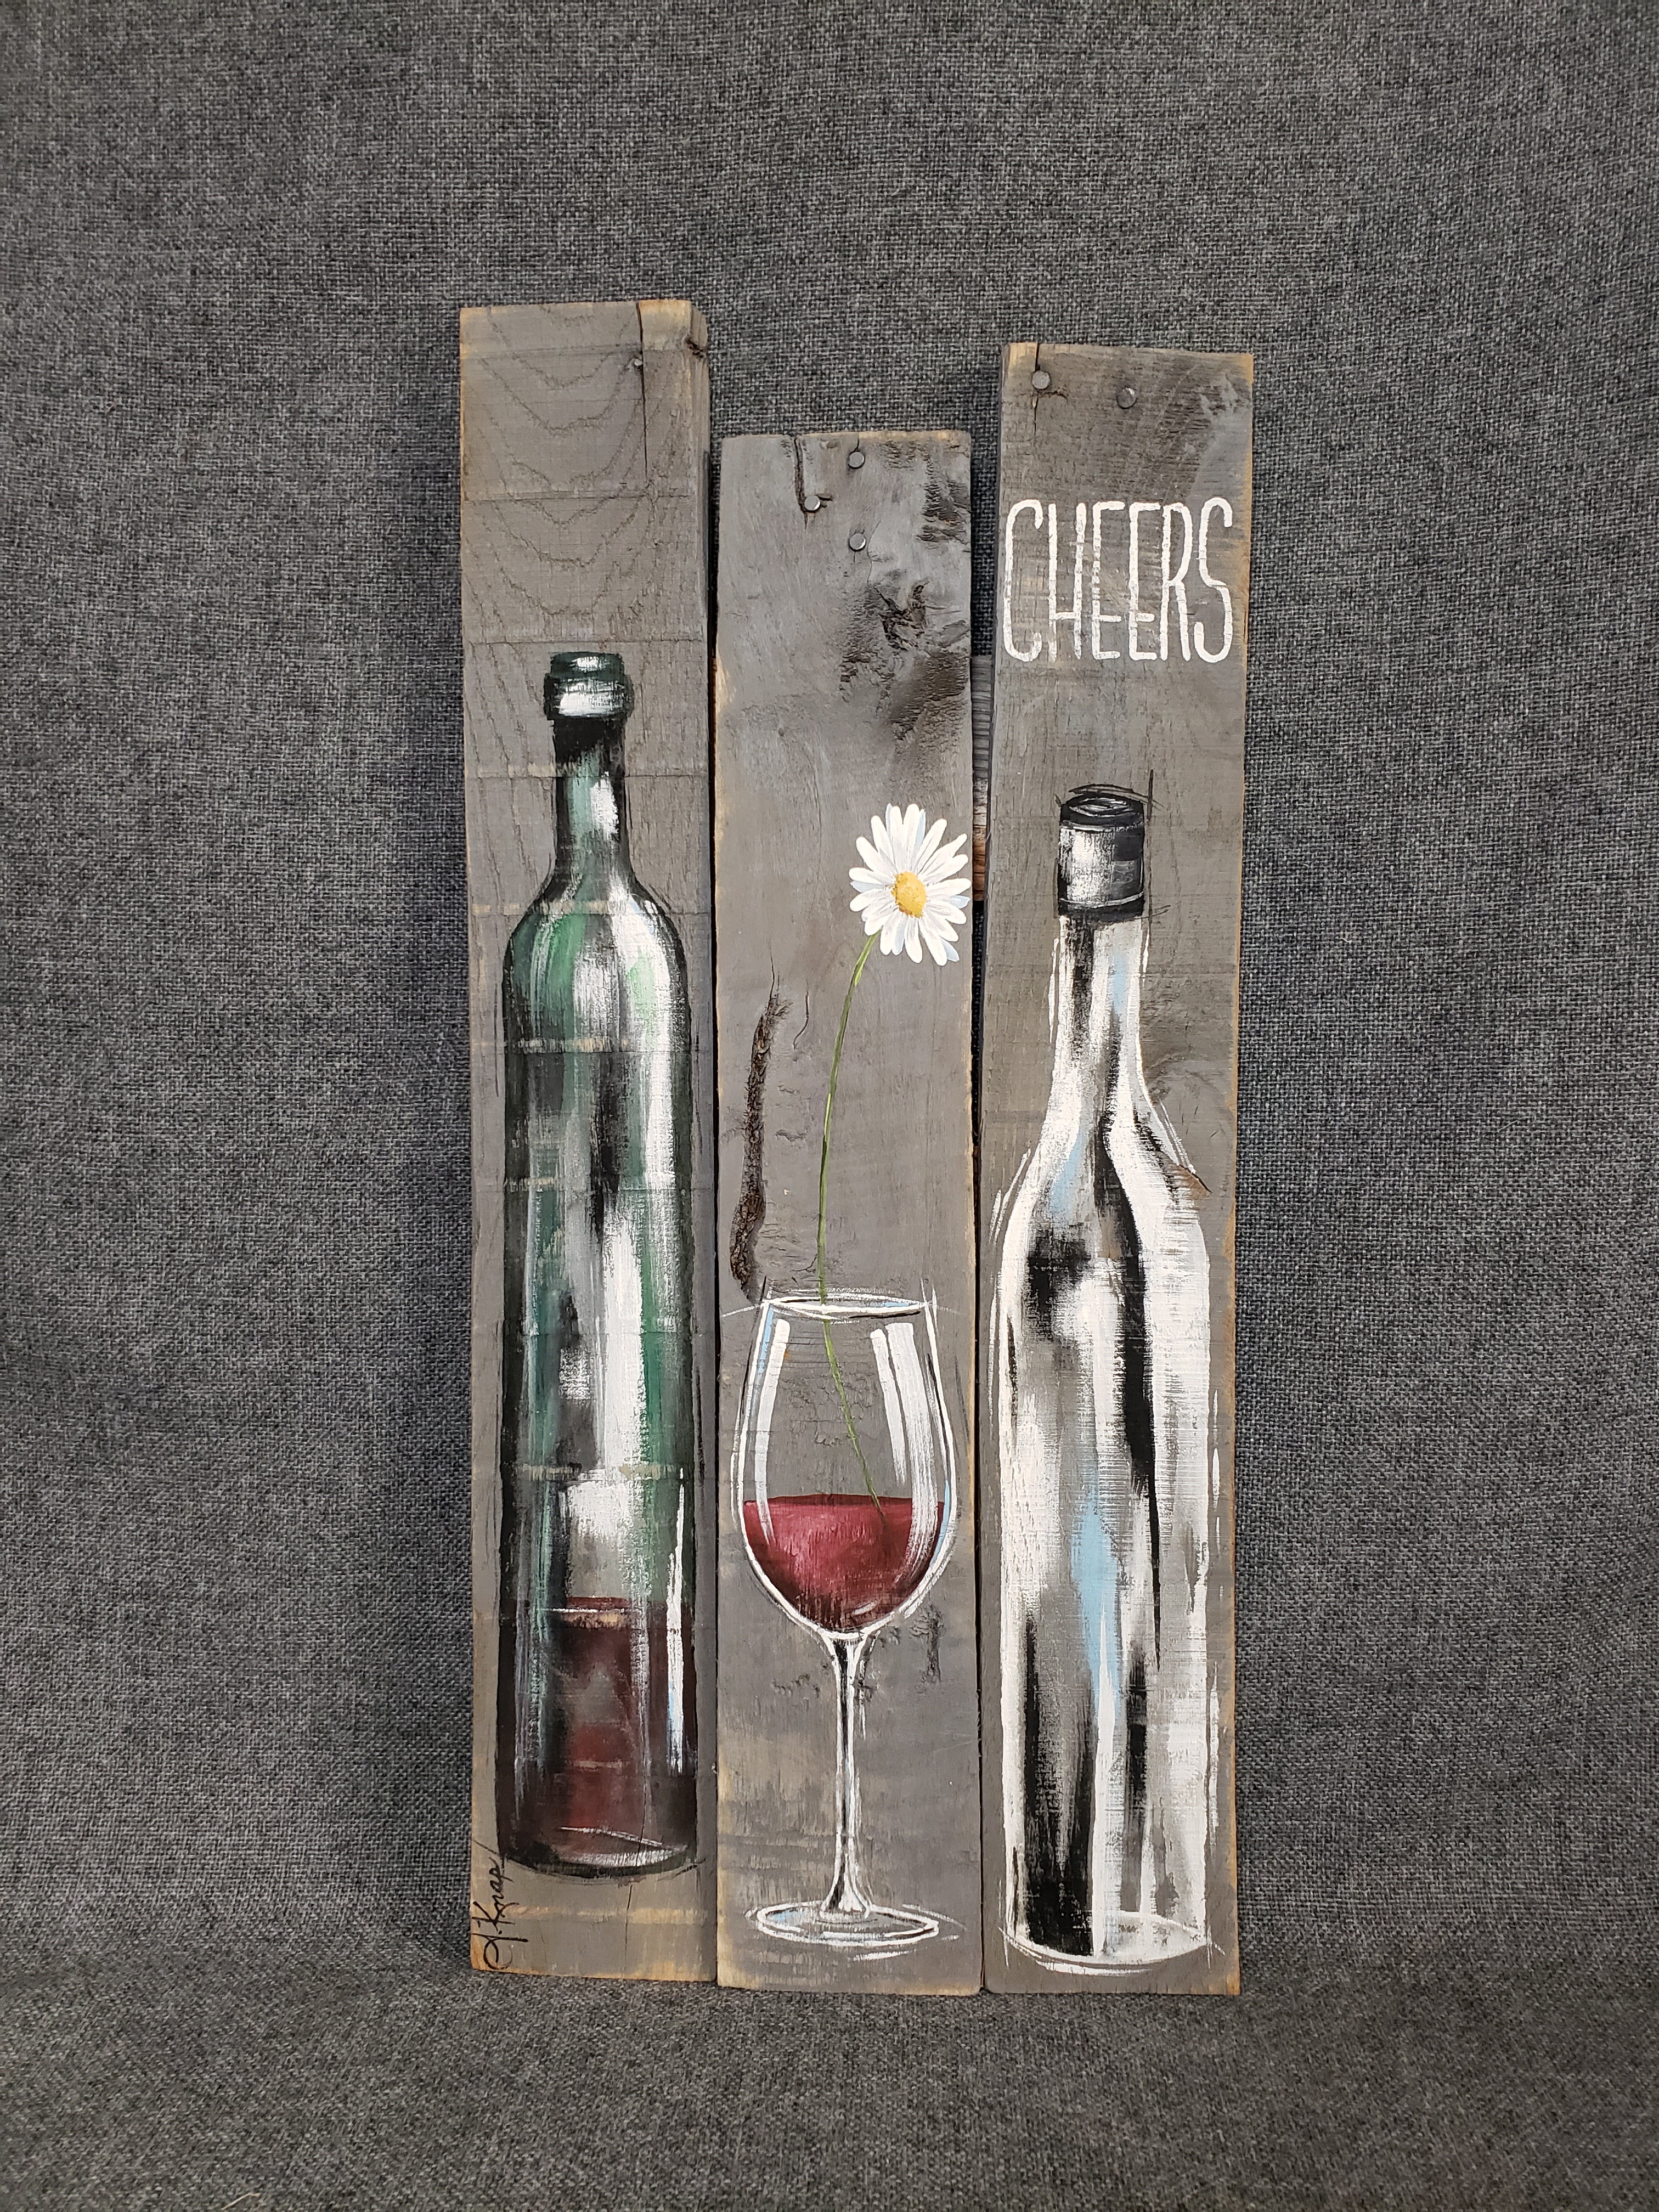 Wine bottle hand painted pallet art, wine lover gift, cheers word art, rustic farmhouse decor